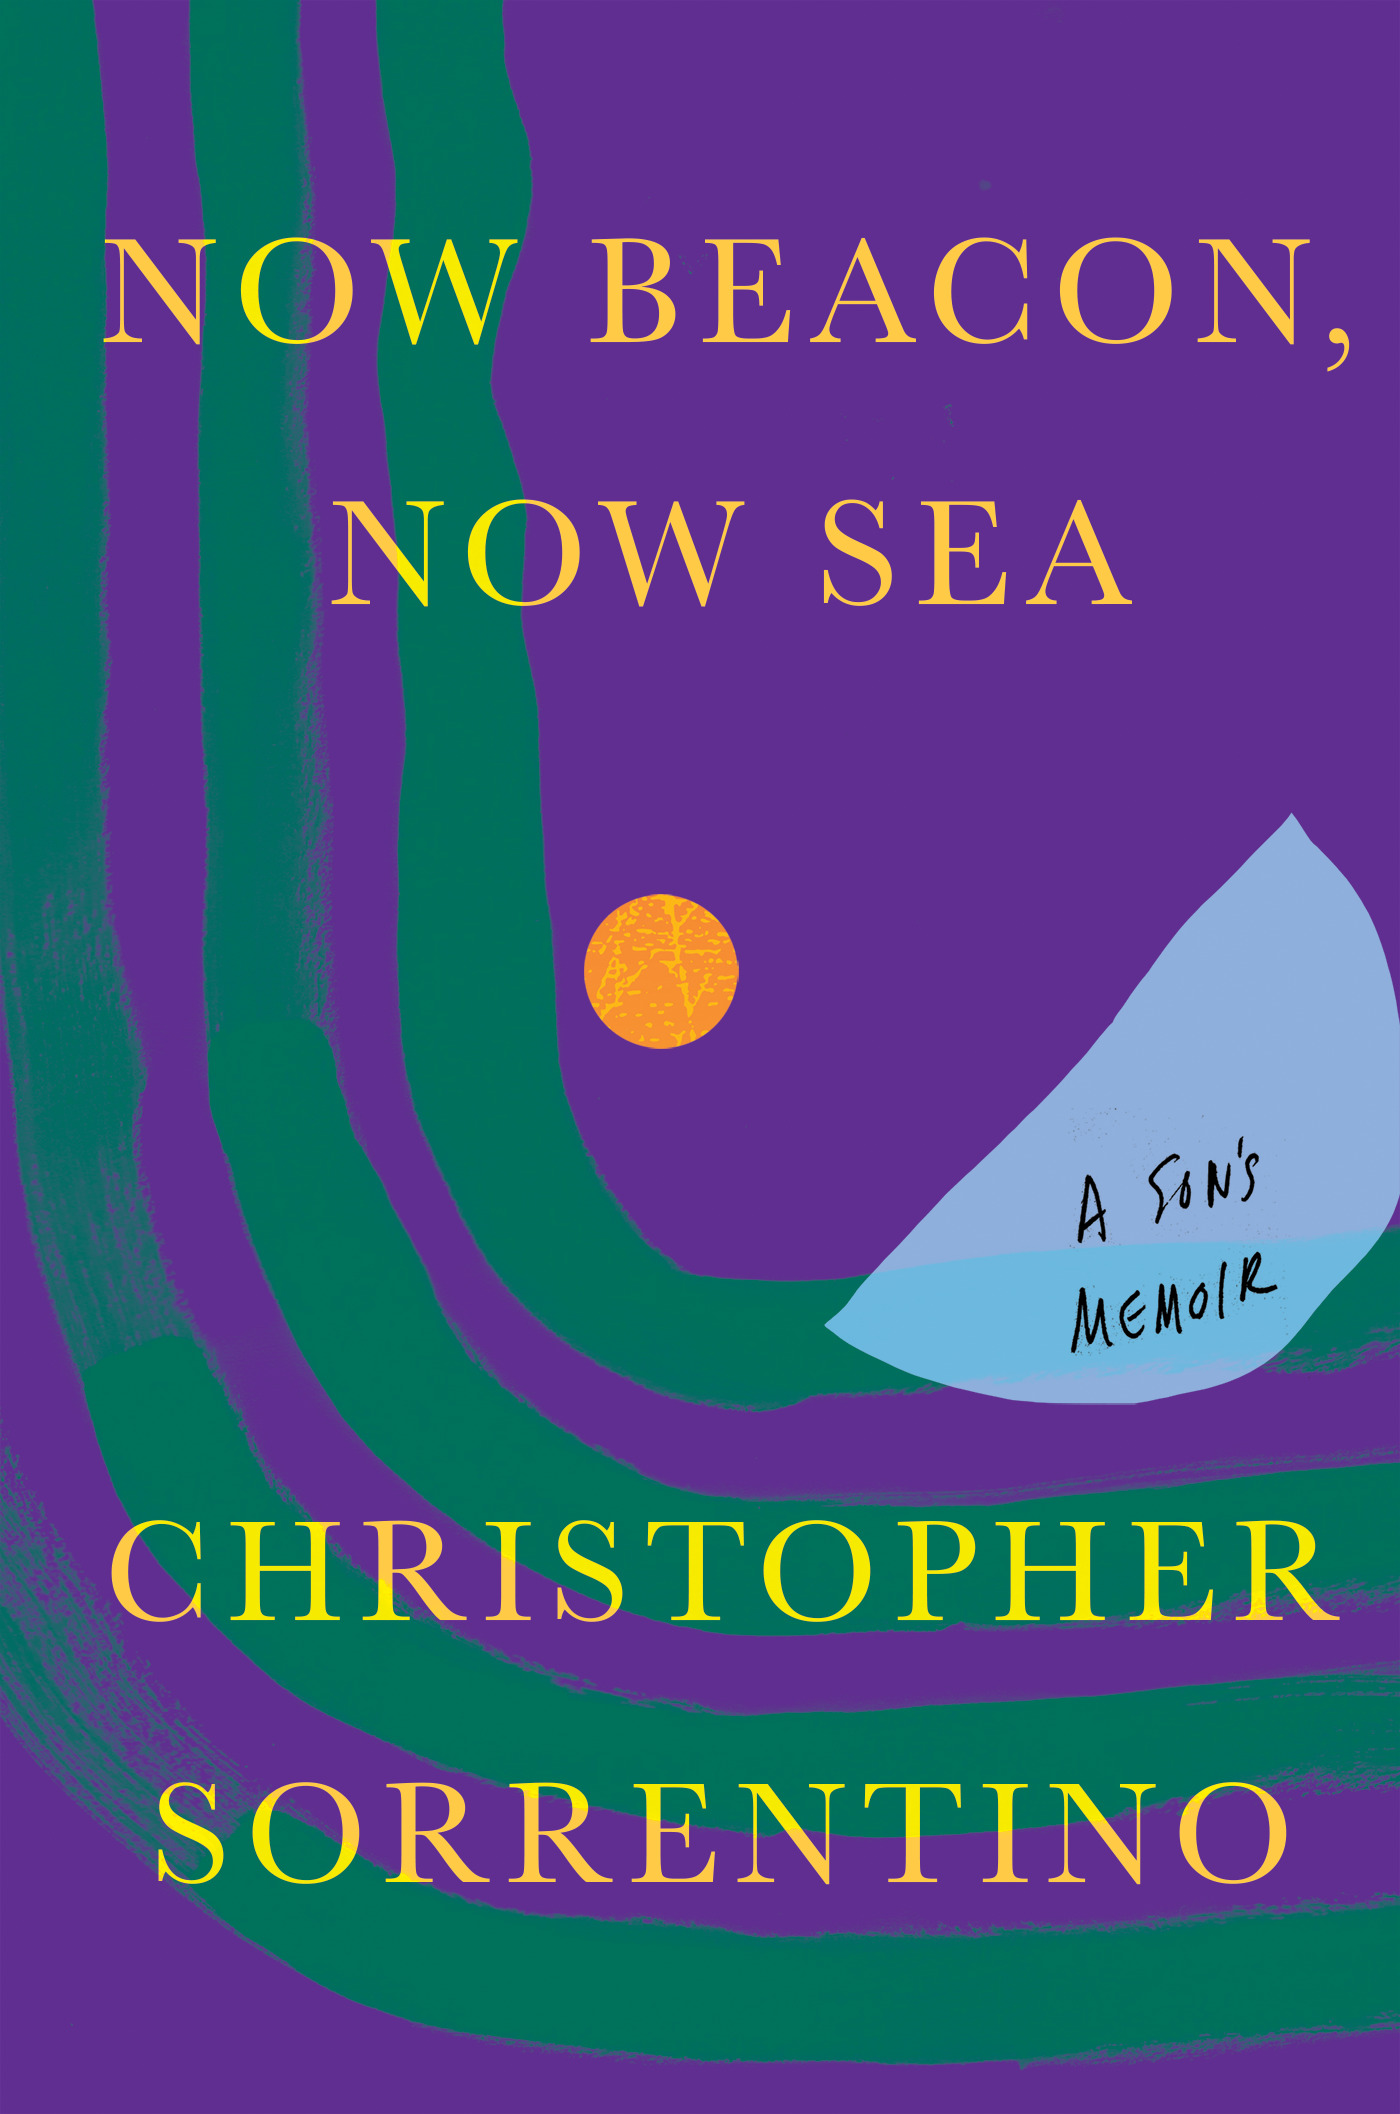 Writers Read: Christopher Sorrentino Reads from Now Beacon, Now Sea: A Son’s Memoir